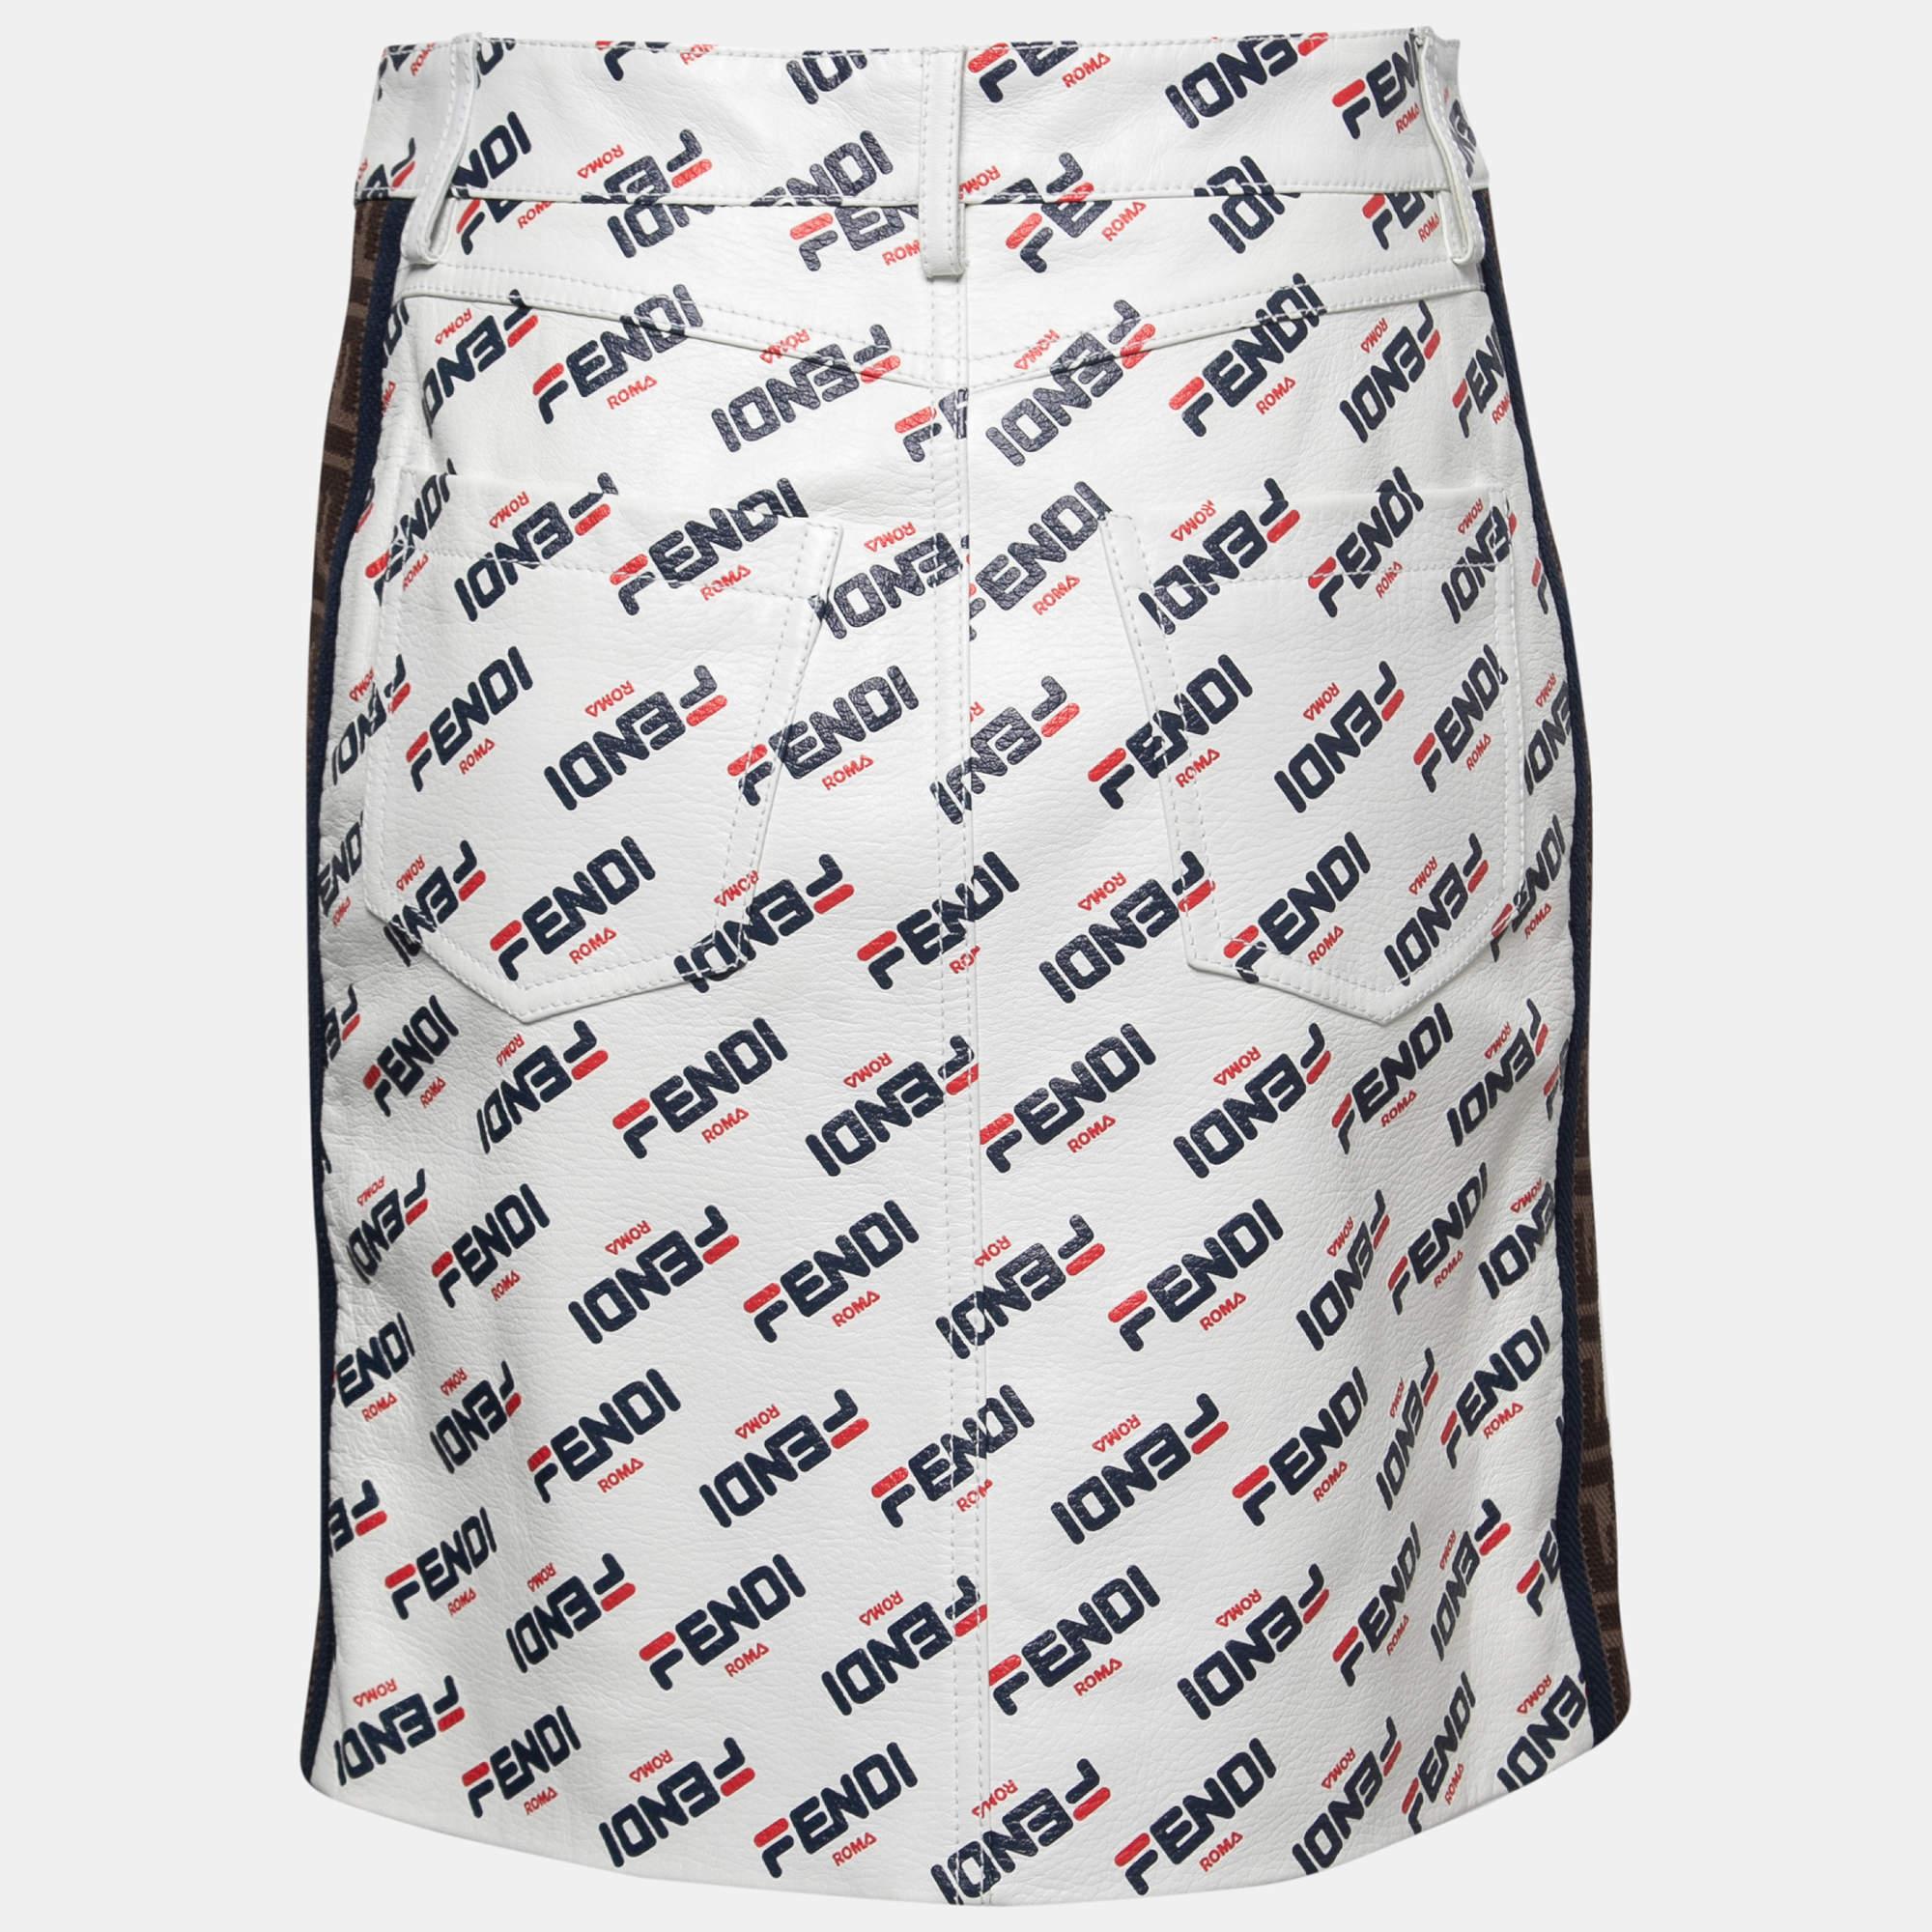 Ditch those regular skirts and go ahead with this fabulous number from Fendi! The white leather skirt has been designed with a 'FENDI ROMA' print all over and an 'FF logo trim detailing on the sides and comes equipped with a buttoned closure and